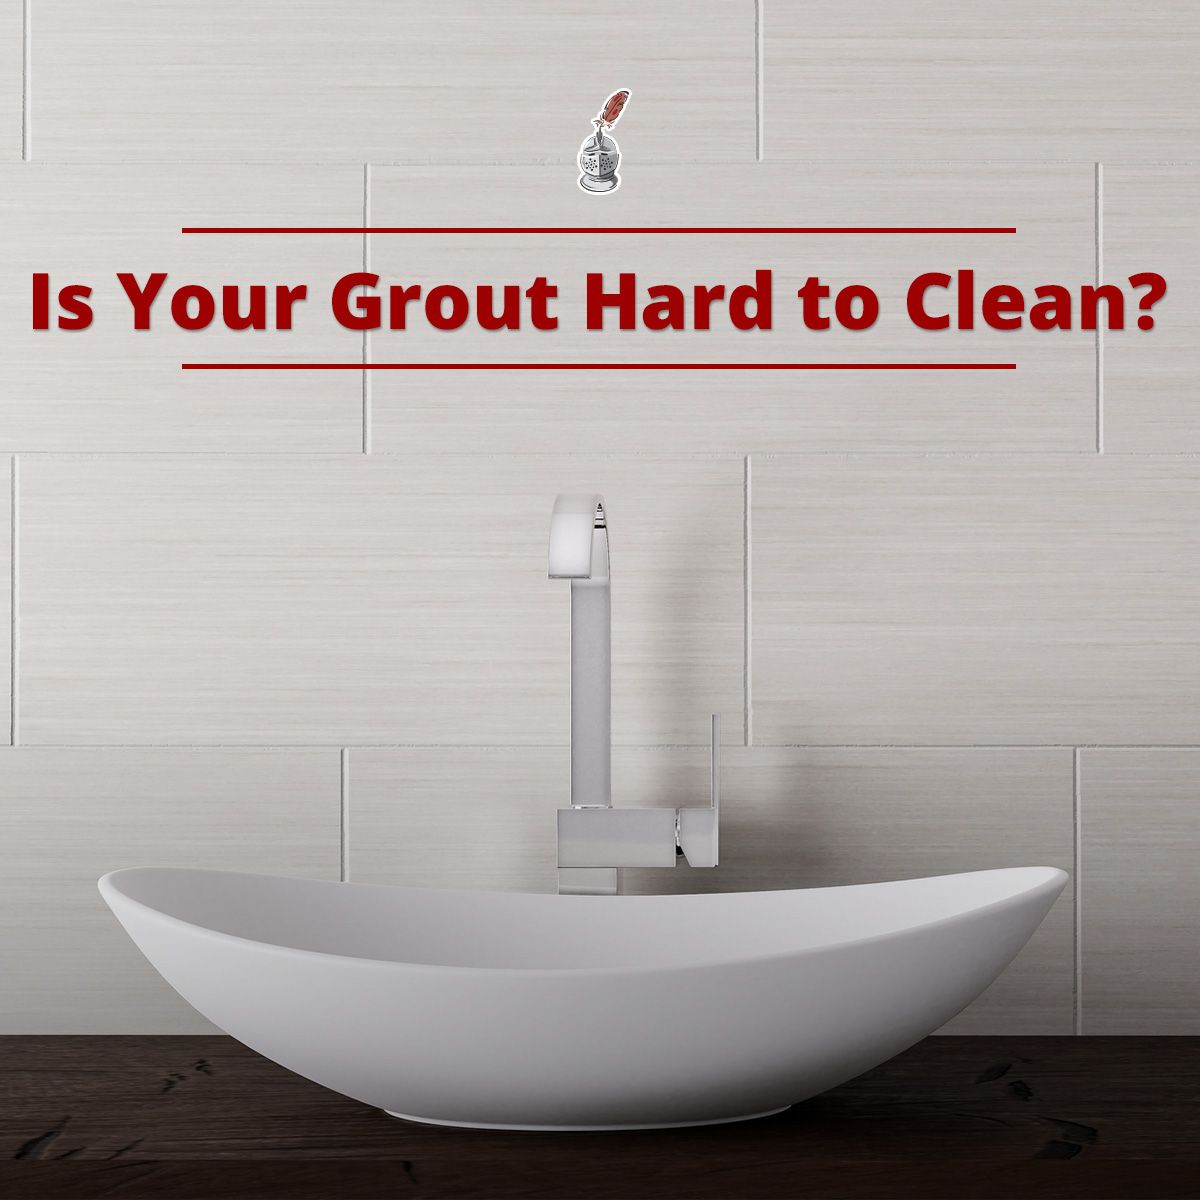 Is Your Grout Hard to Clean?